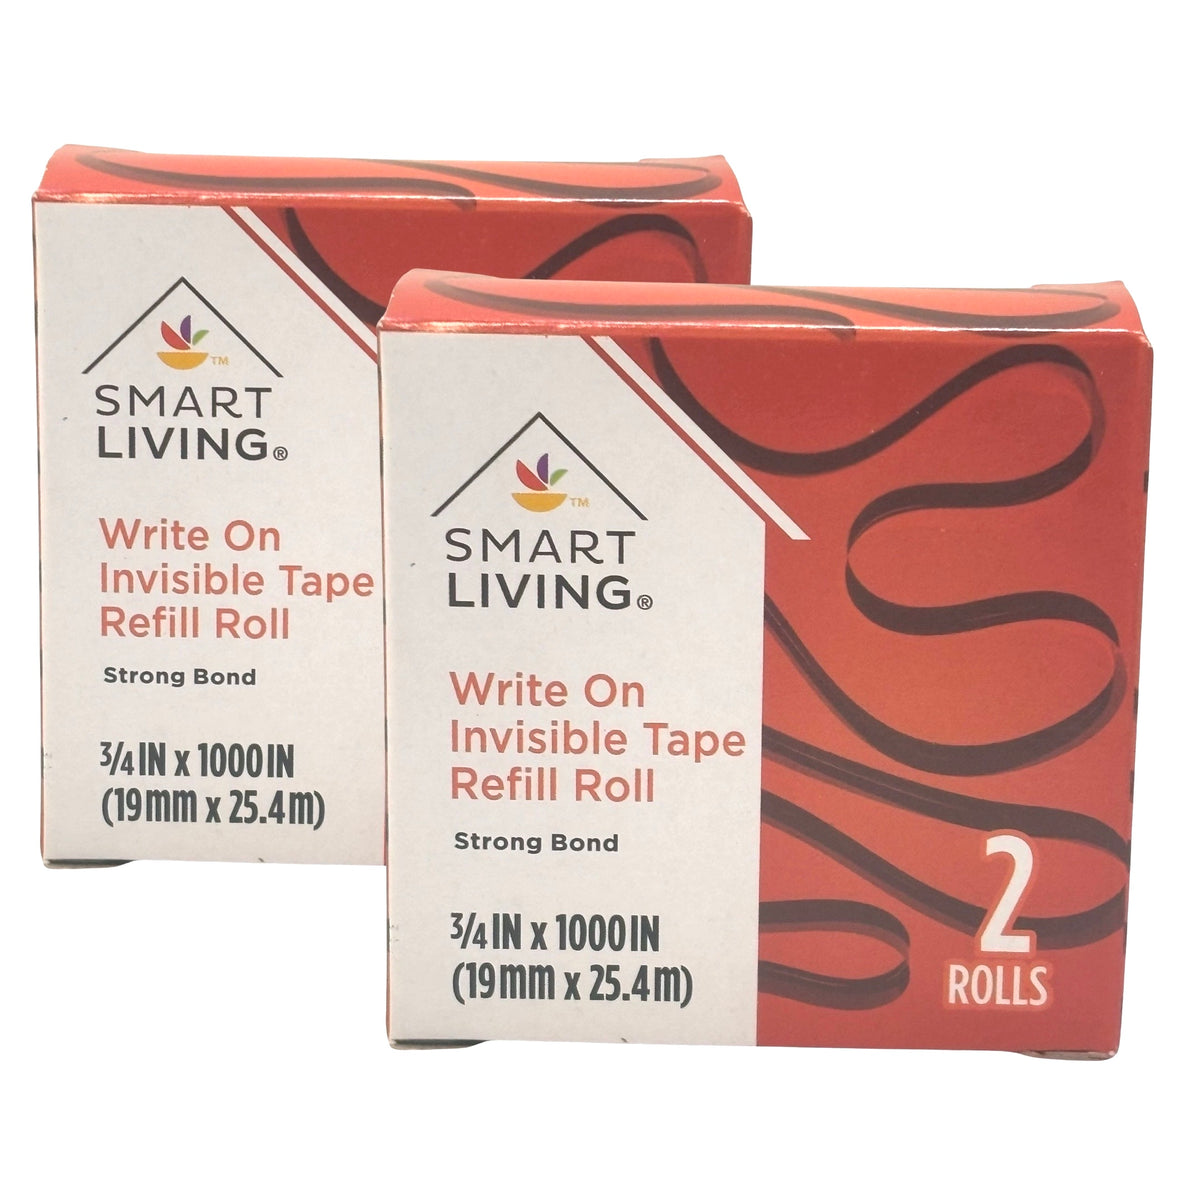 Smart Living 2pk Write On Invisible Tape - Strong Bond